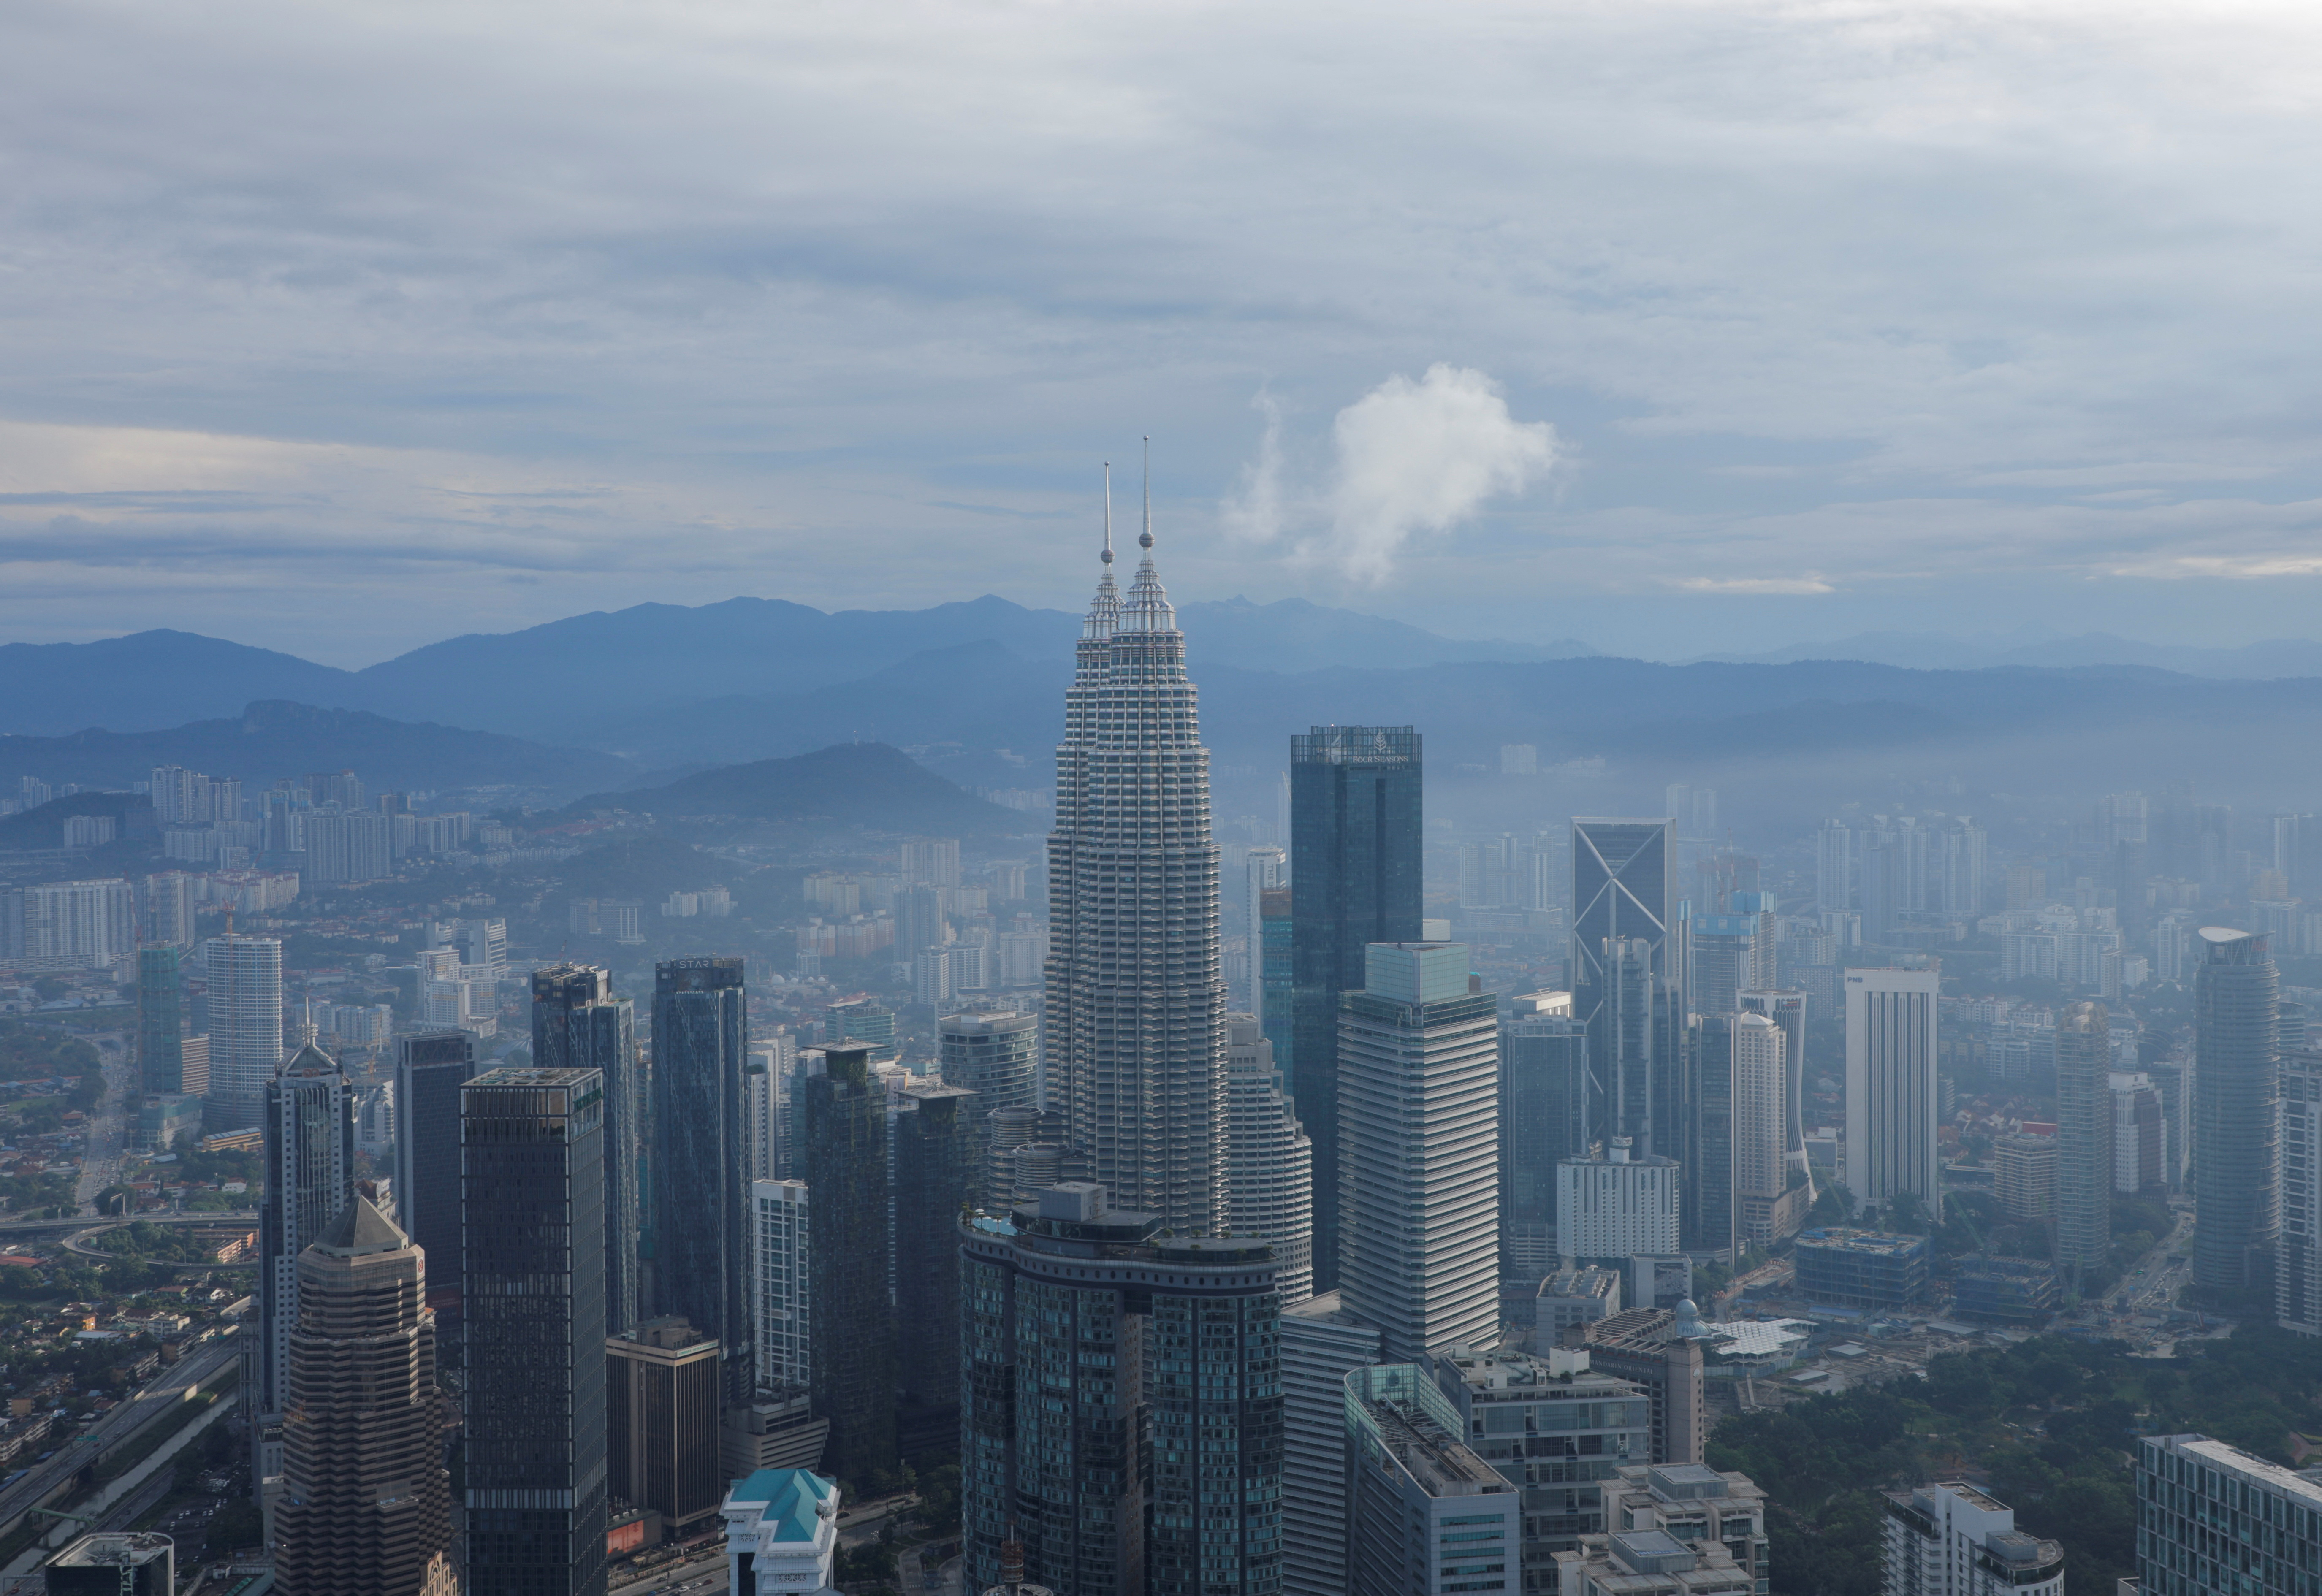 A general view of city skyline in Kuala Lumpur